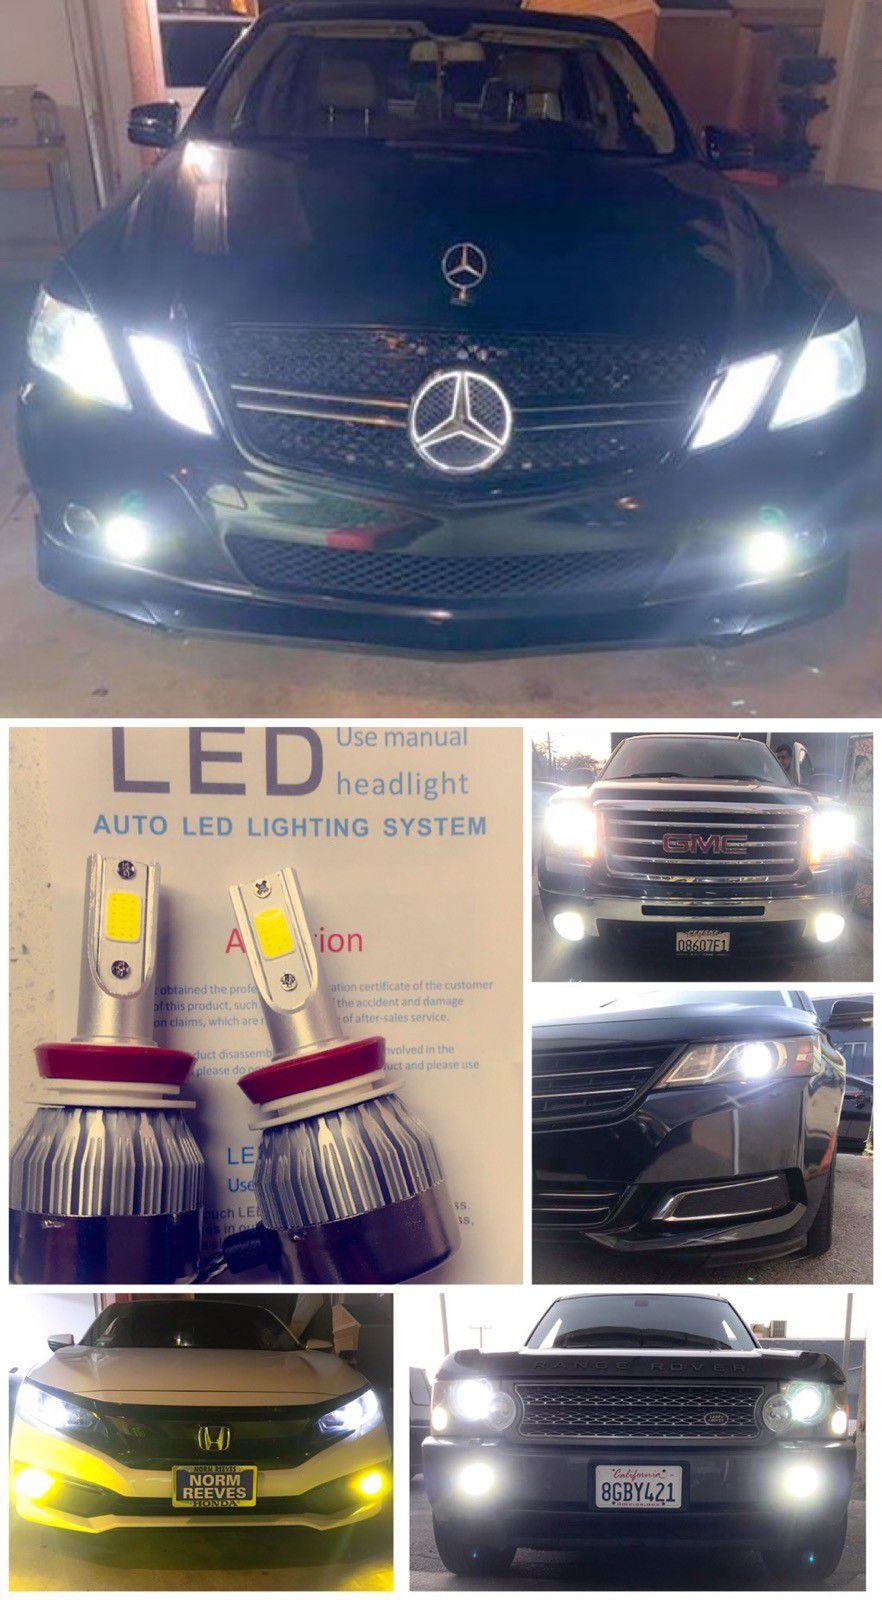 Super bright led headlights 25$ 1 year warranty free license plate LEDs with purchase plug and play system for all cars available 6000k hyper white